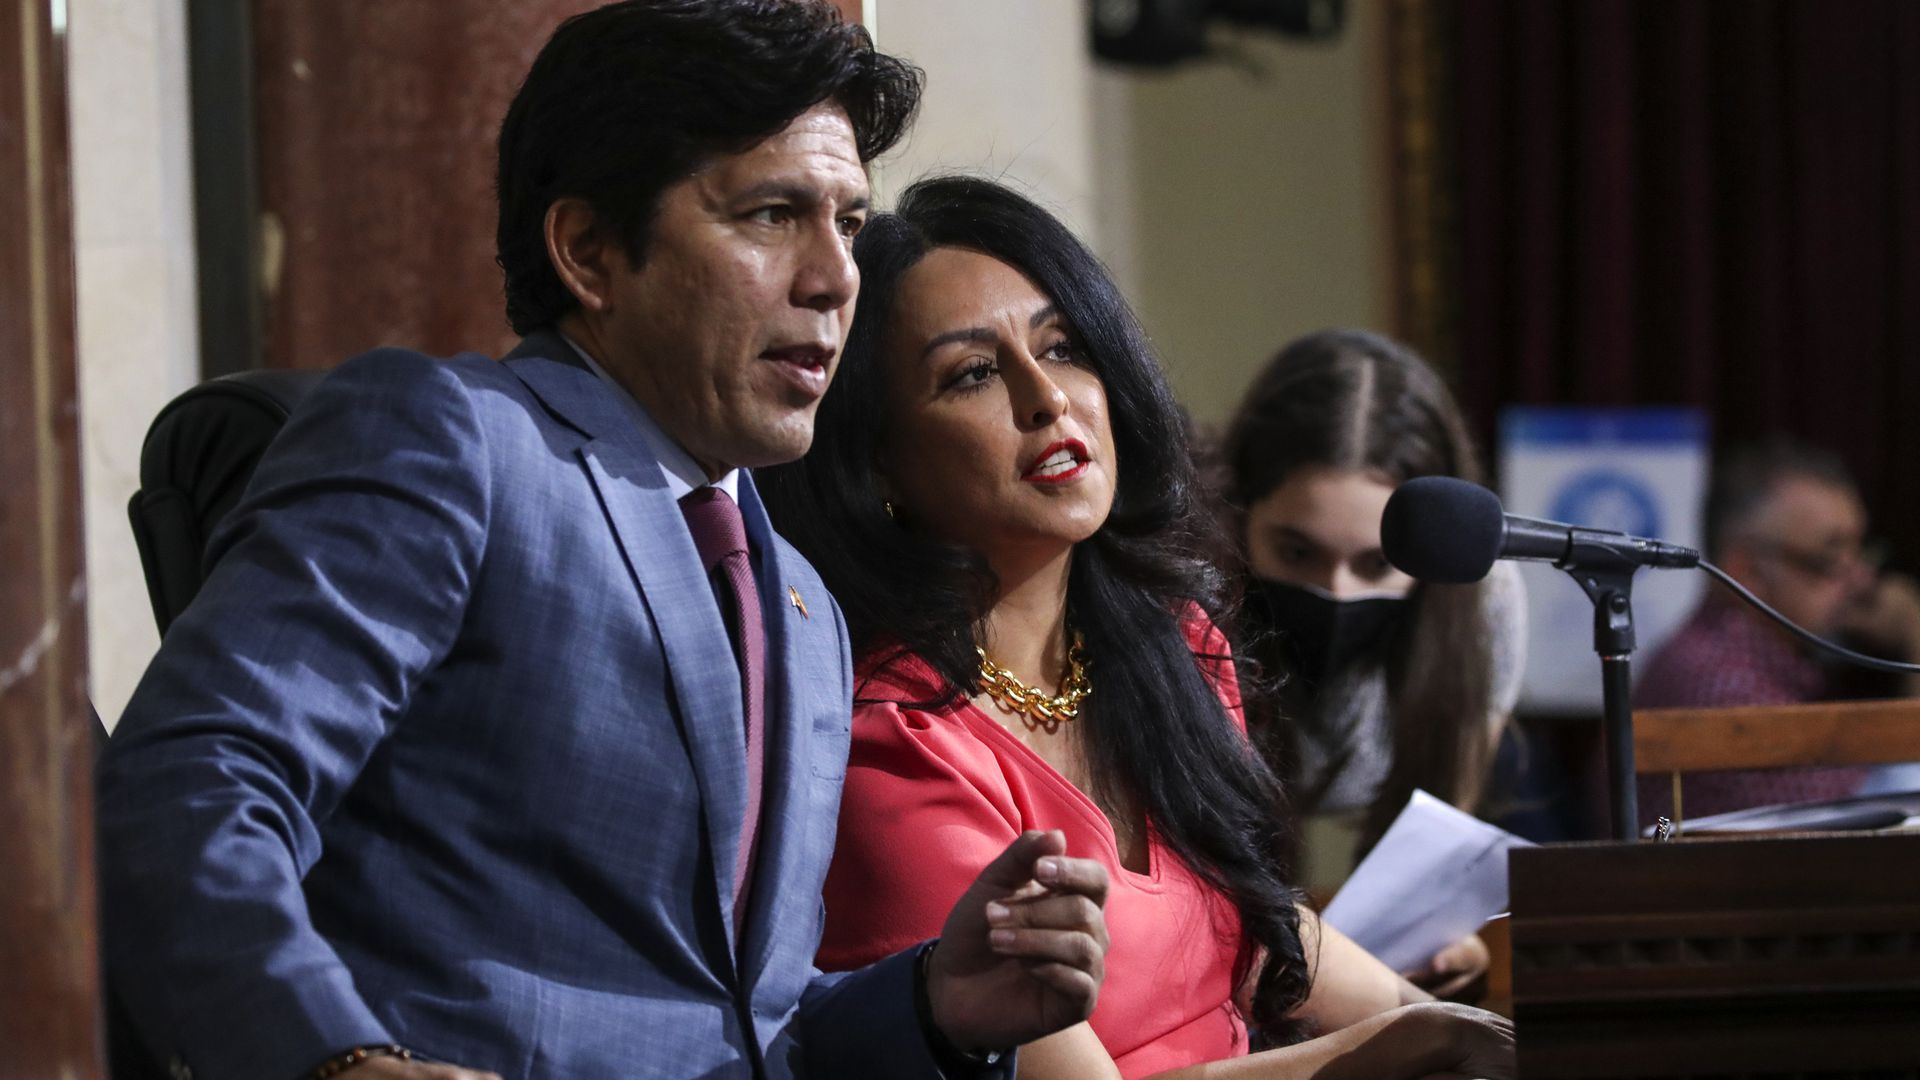 Los Angeles Councilman Kevin de León and Los Angeles City Council President Nury Martinez speak among themselves behind a microphone, both looking off to the side